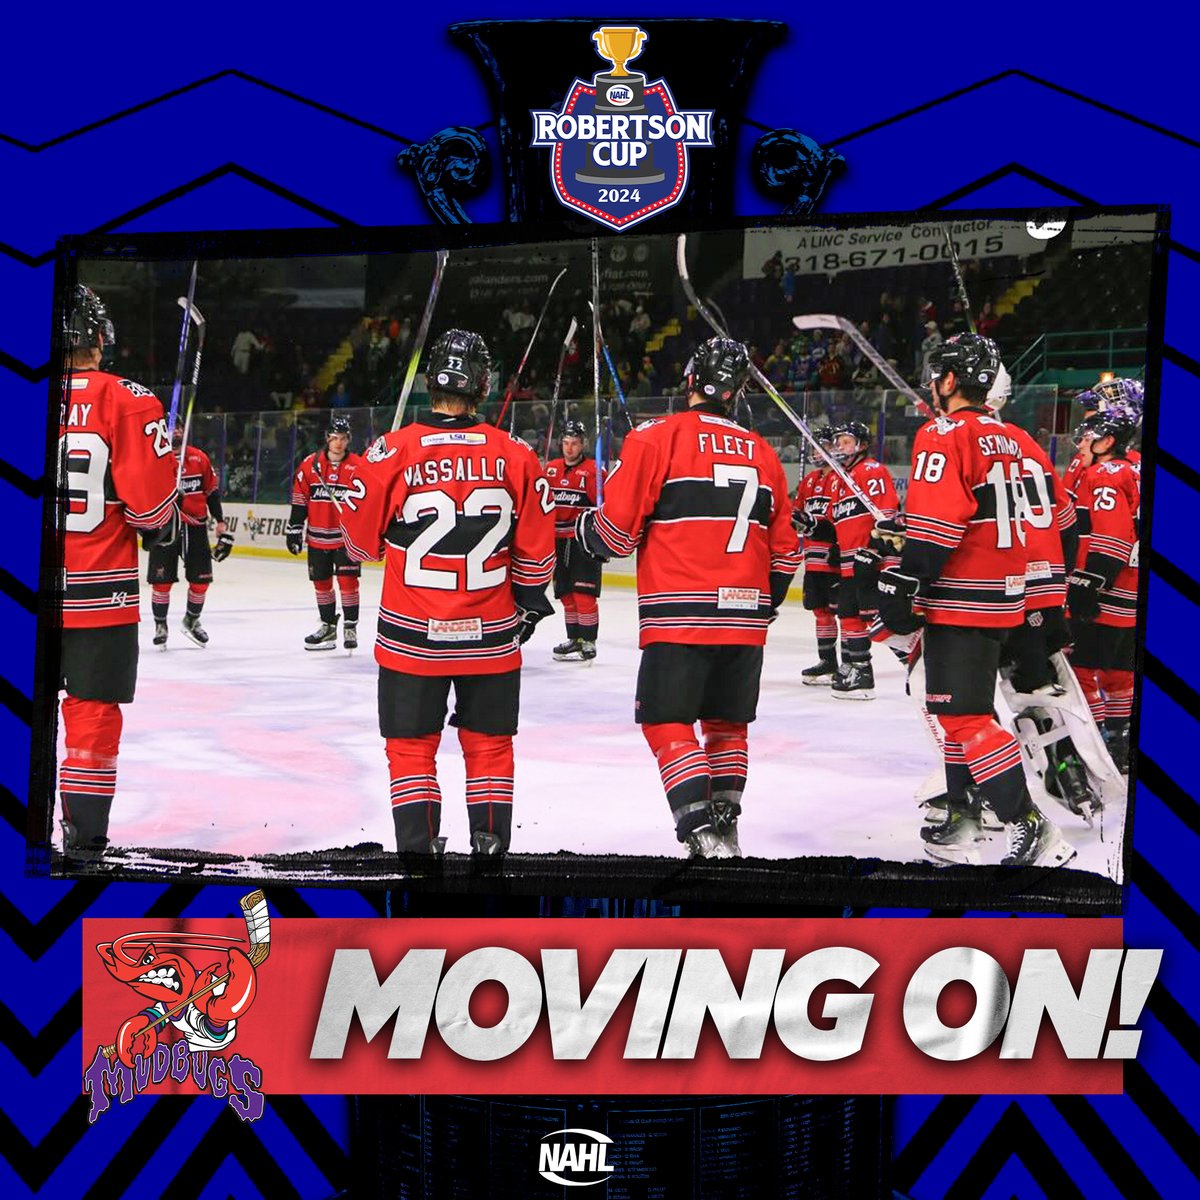 𝓜𝓸𝓿𝓲𝓷𝓰 𝓞𝓷 The Mudbugs are heading to the South Division Finals!